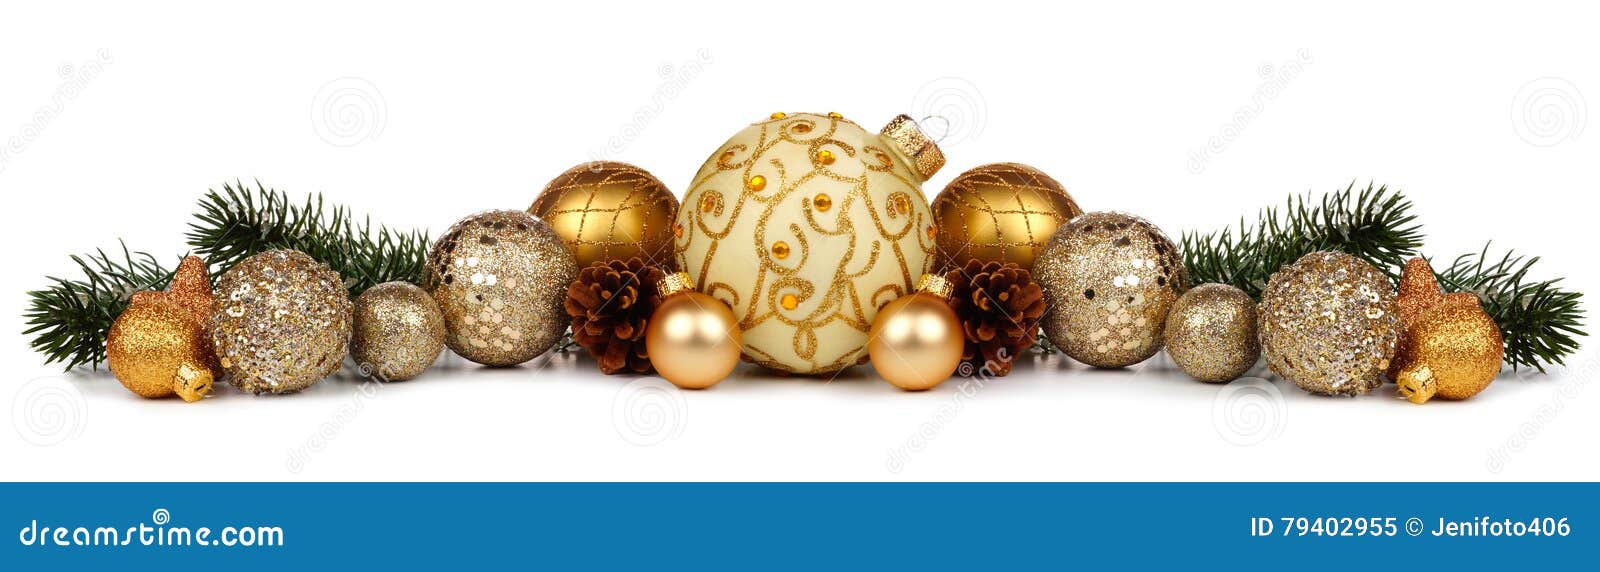 christmas border of gold ornaments and branches  on white